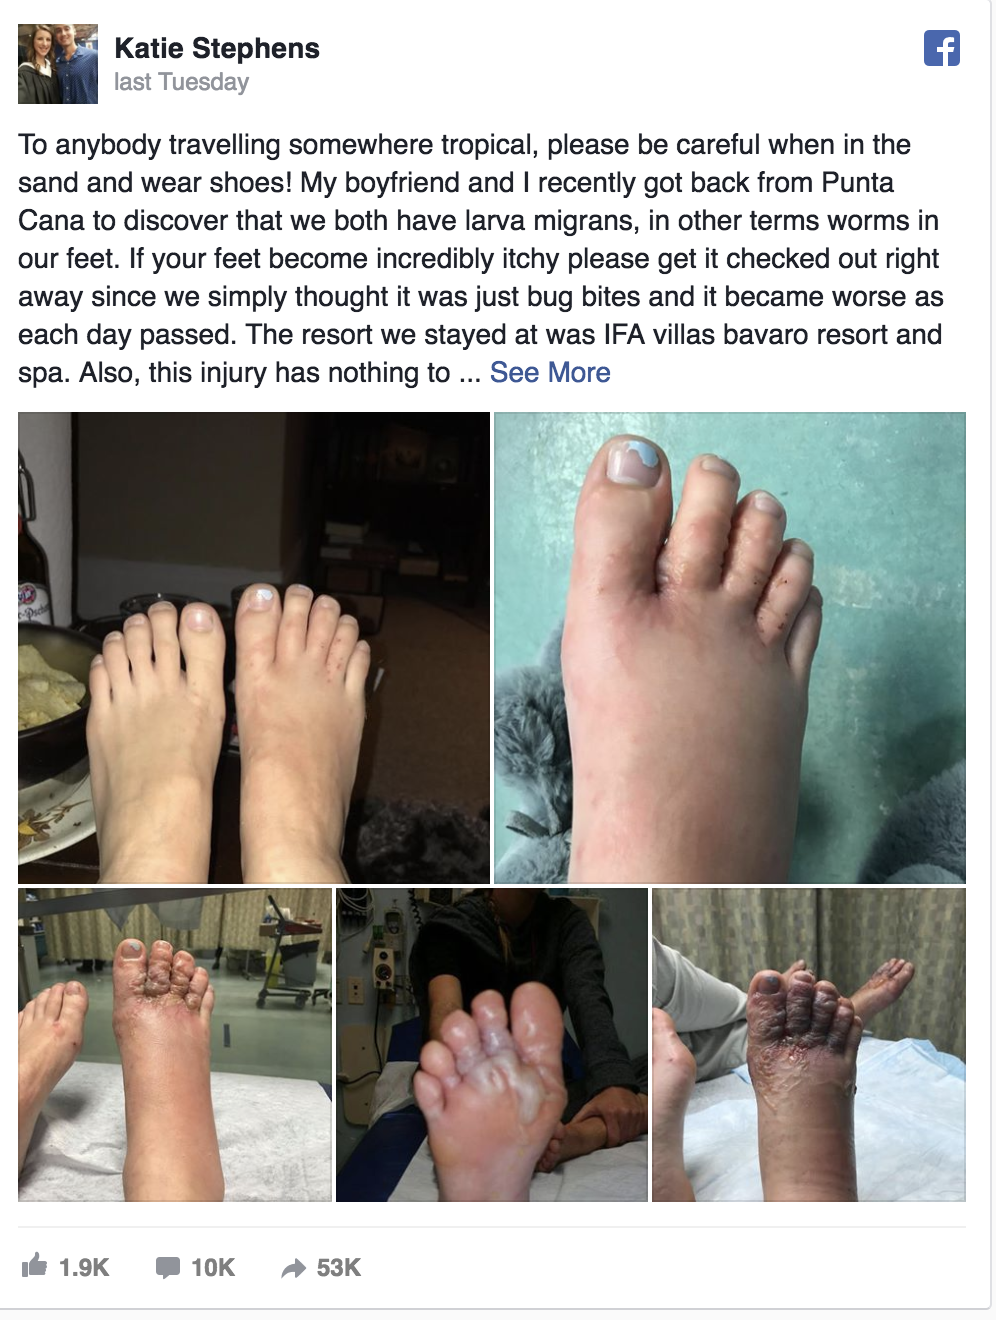 Couple contract parasitic hookworm in feet after walking on Punta